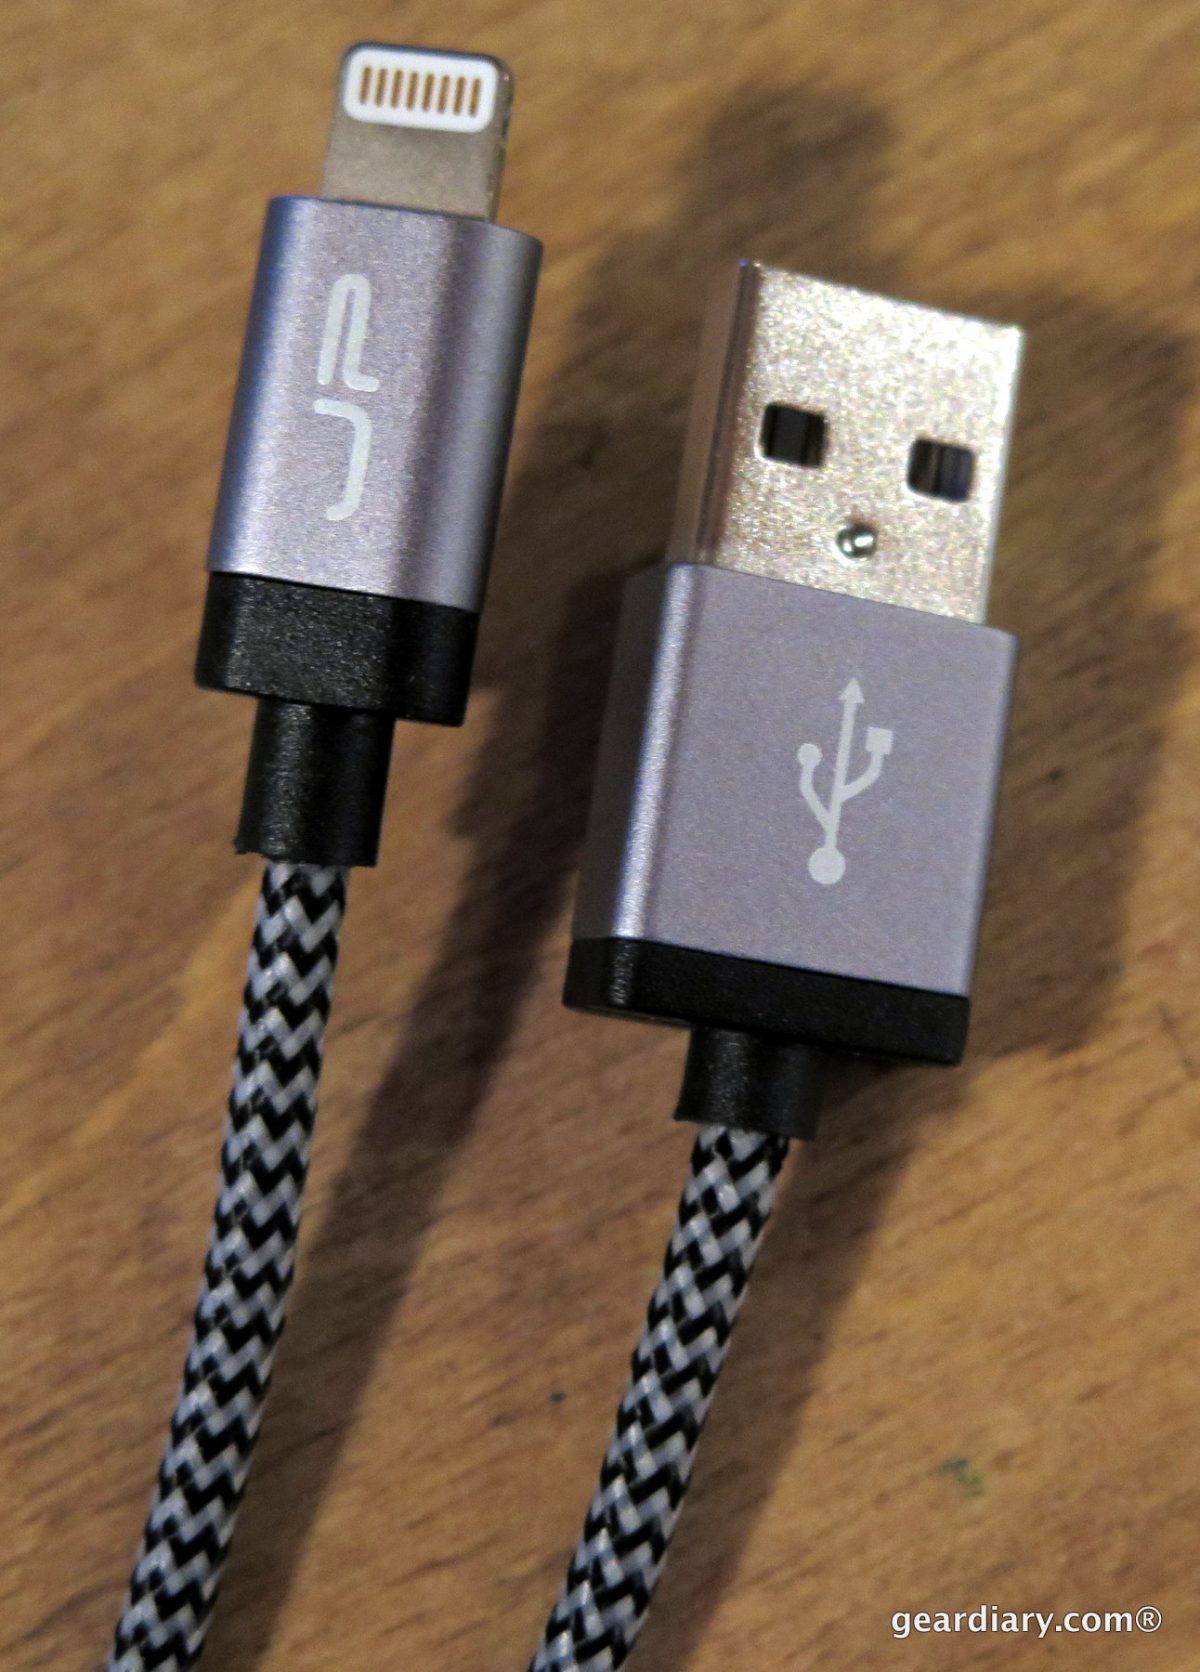 JunoPower Kaebo Lightning Cable Review: Guaranteed to Last